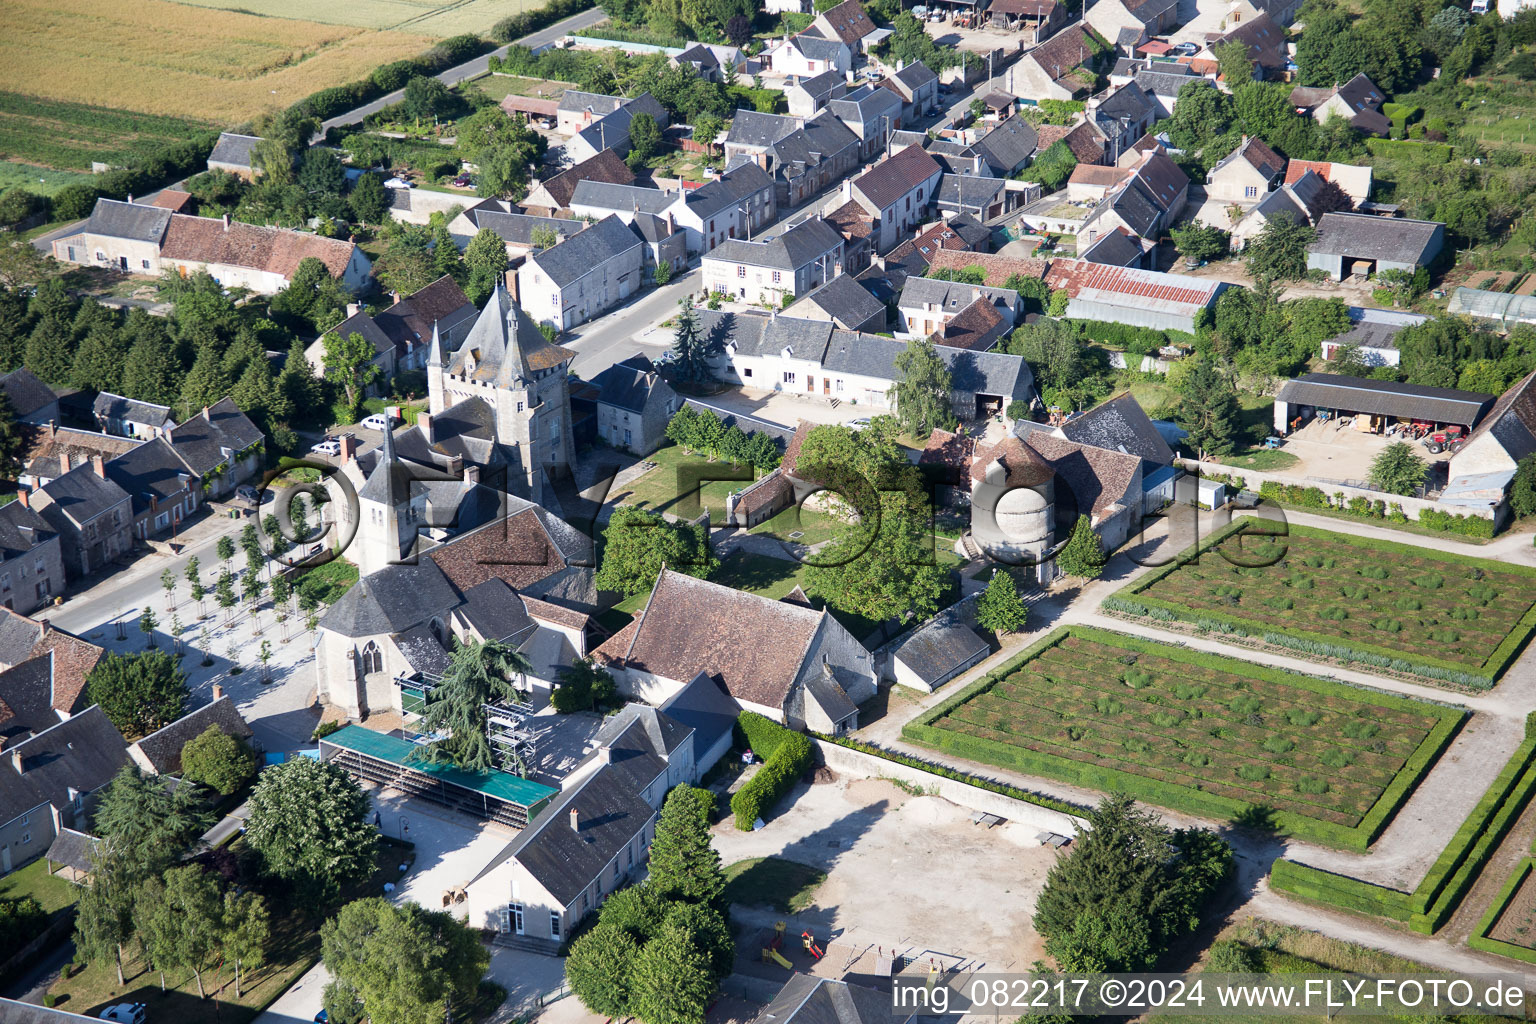 Talcy in the state Loir et Cher, France out of the air